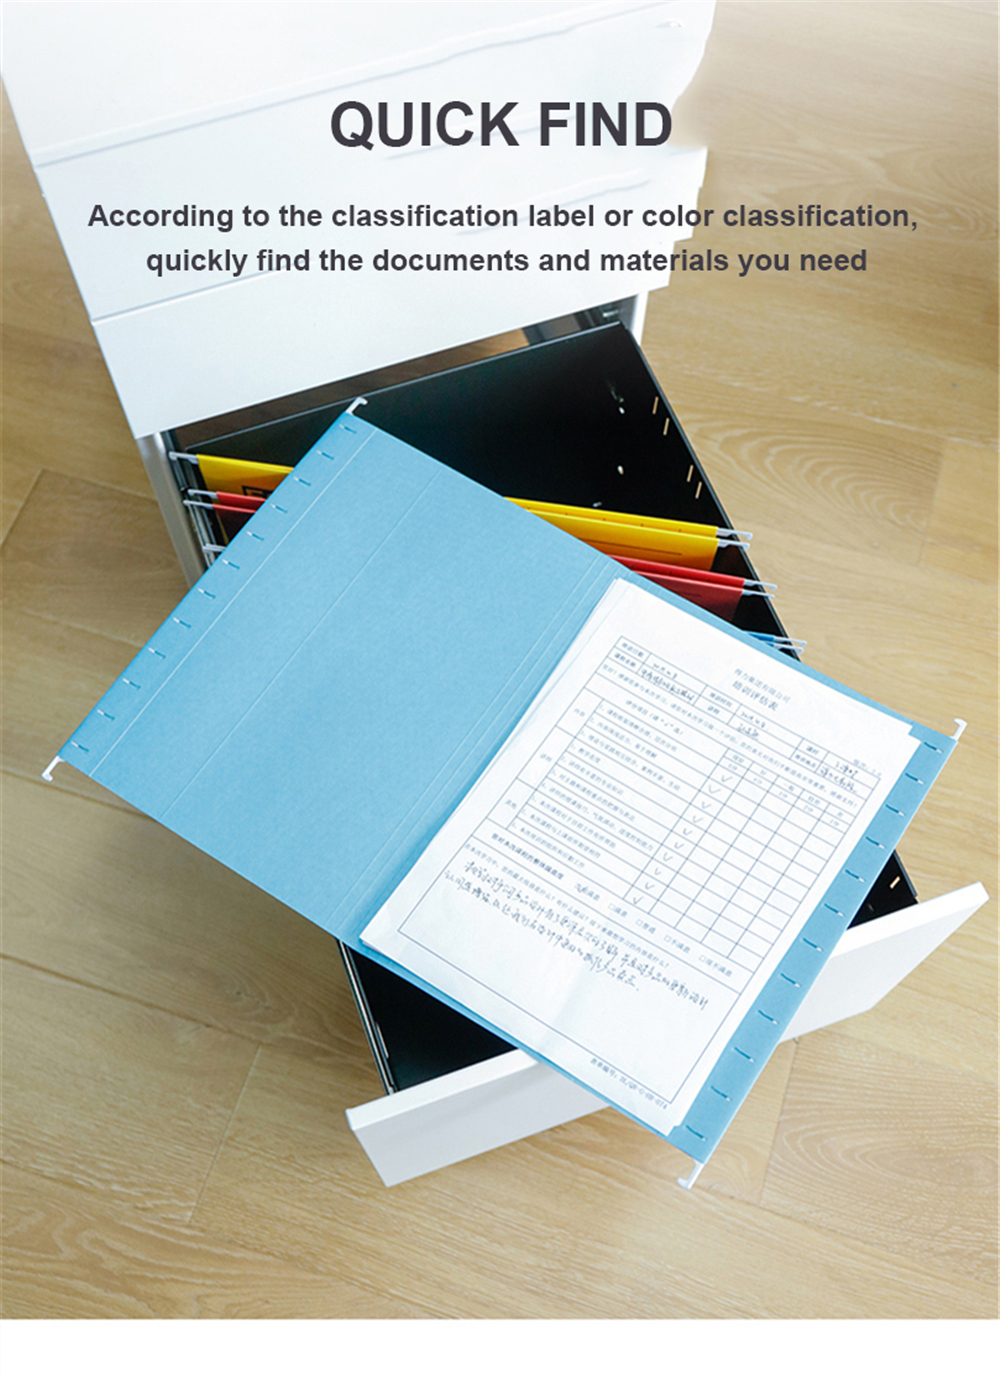 Deli 5468 A4 Suspension File Folder Quick Labor Classisfication Clip Paper Organizing Four Colors File Storage For Office School Stationery